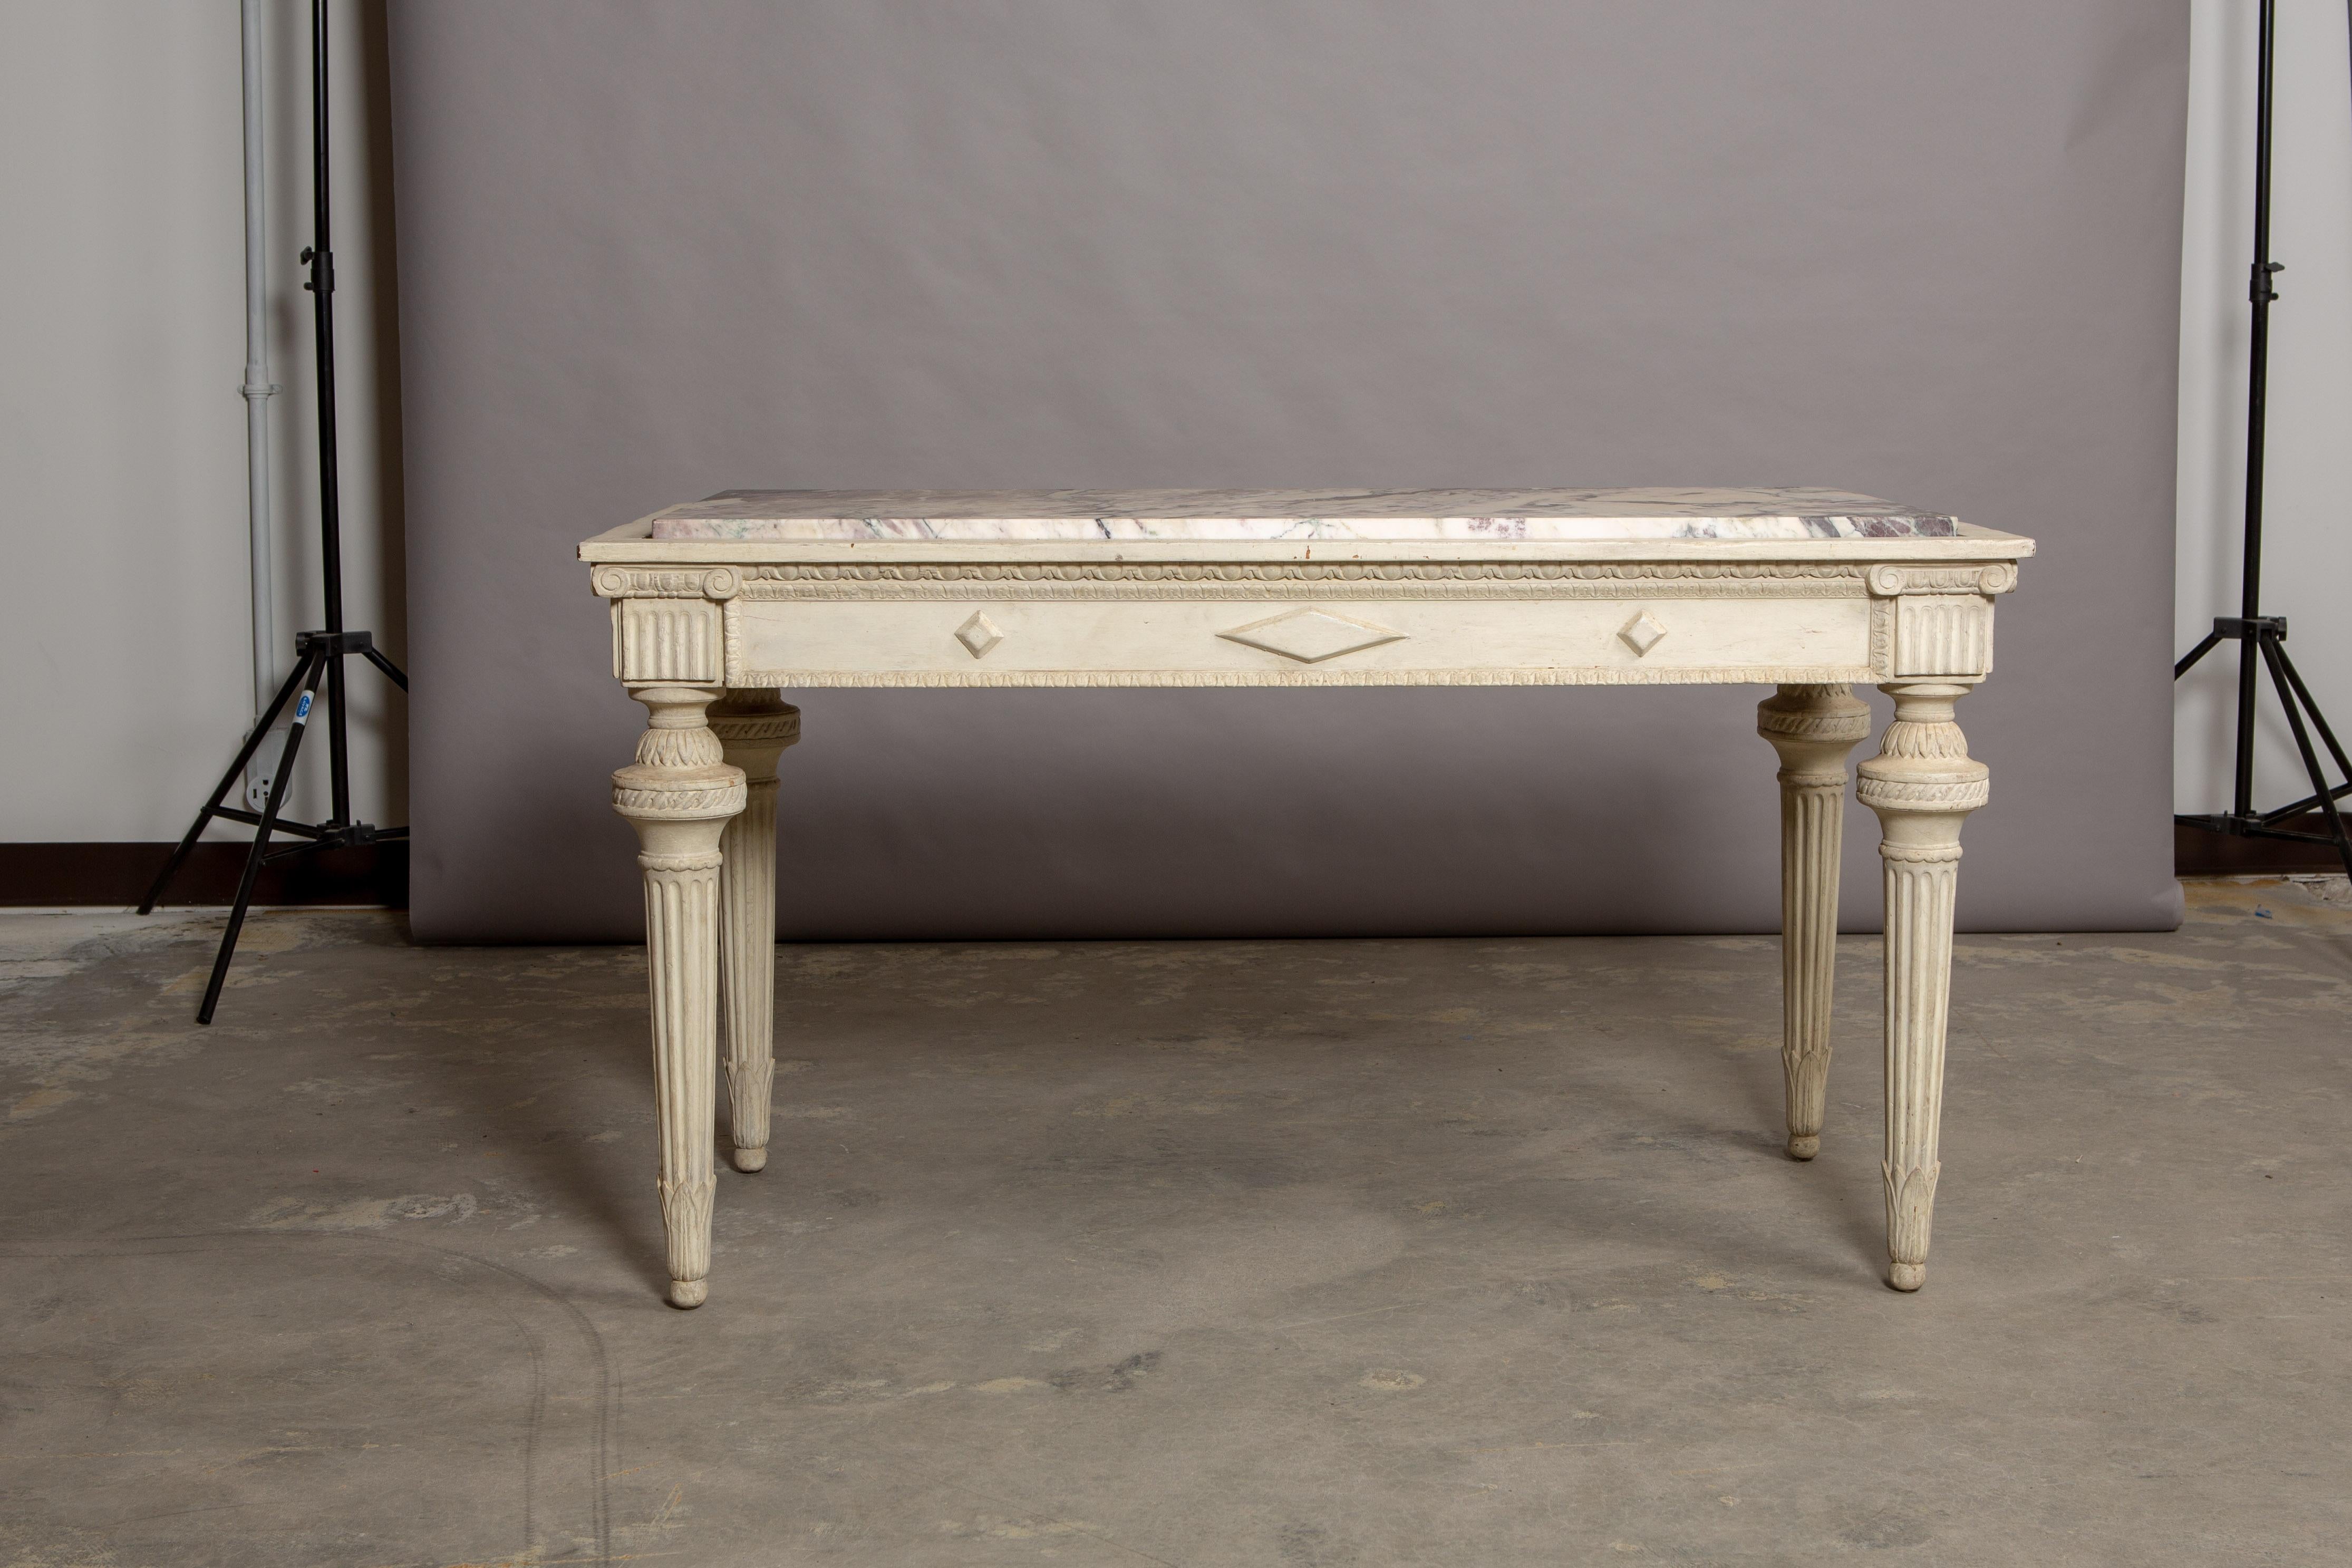 19th century French marble-top table with tapered column style legs and violet breche marble top. Beautiful variegated marble measuring 48.75